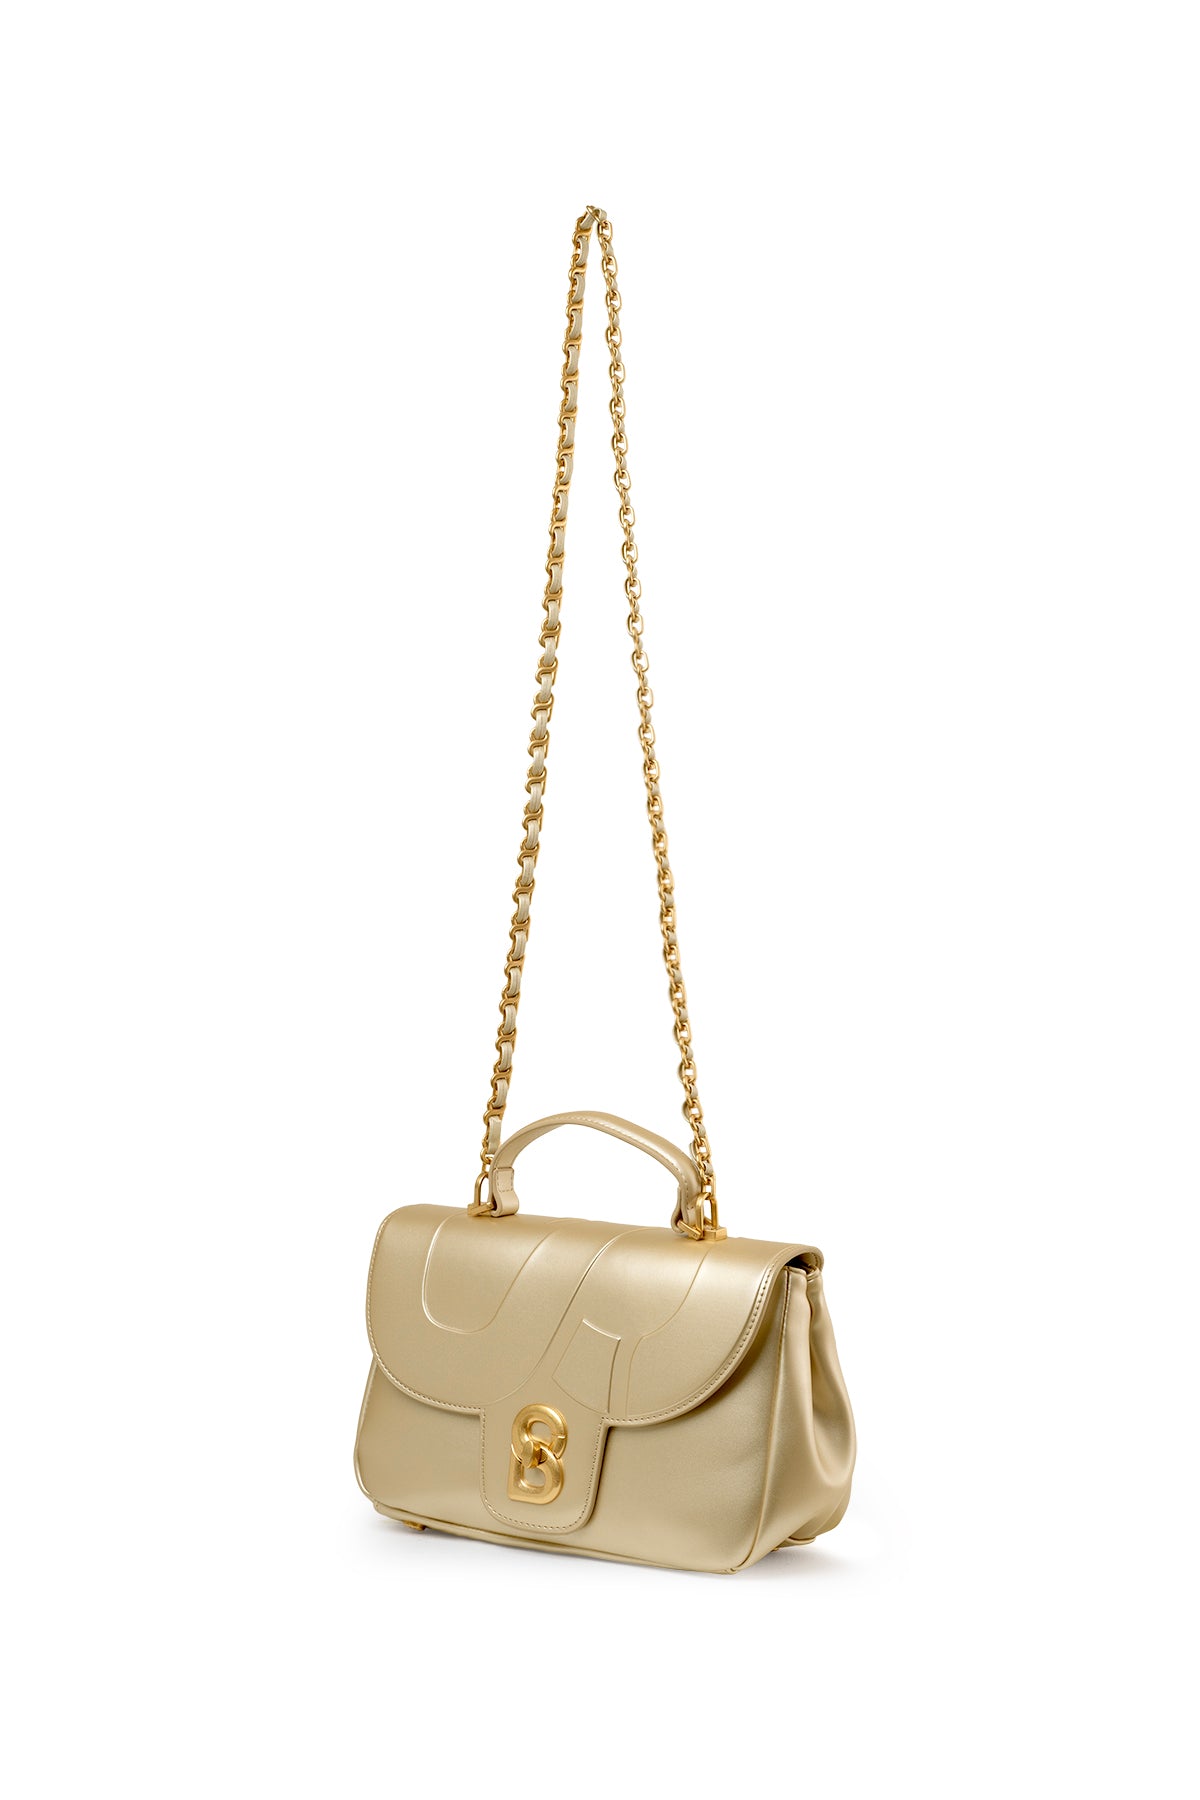 Alma flap Bag Beige by Buttonscarves